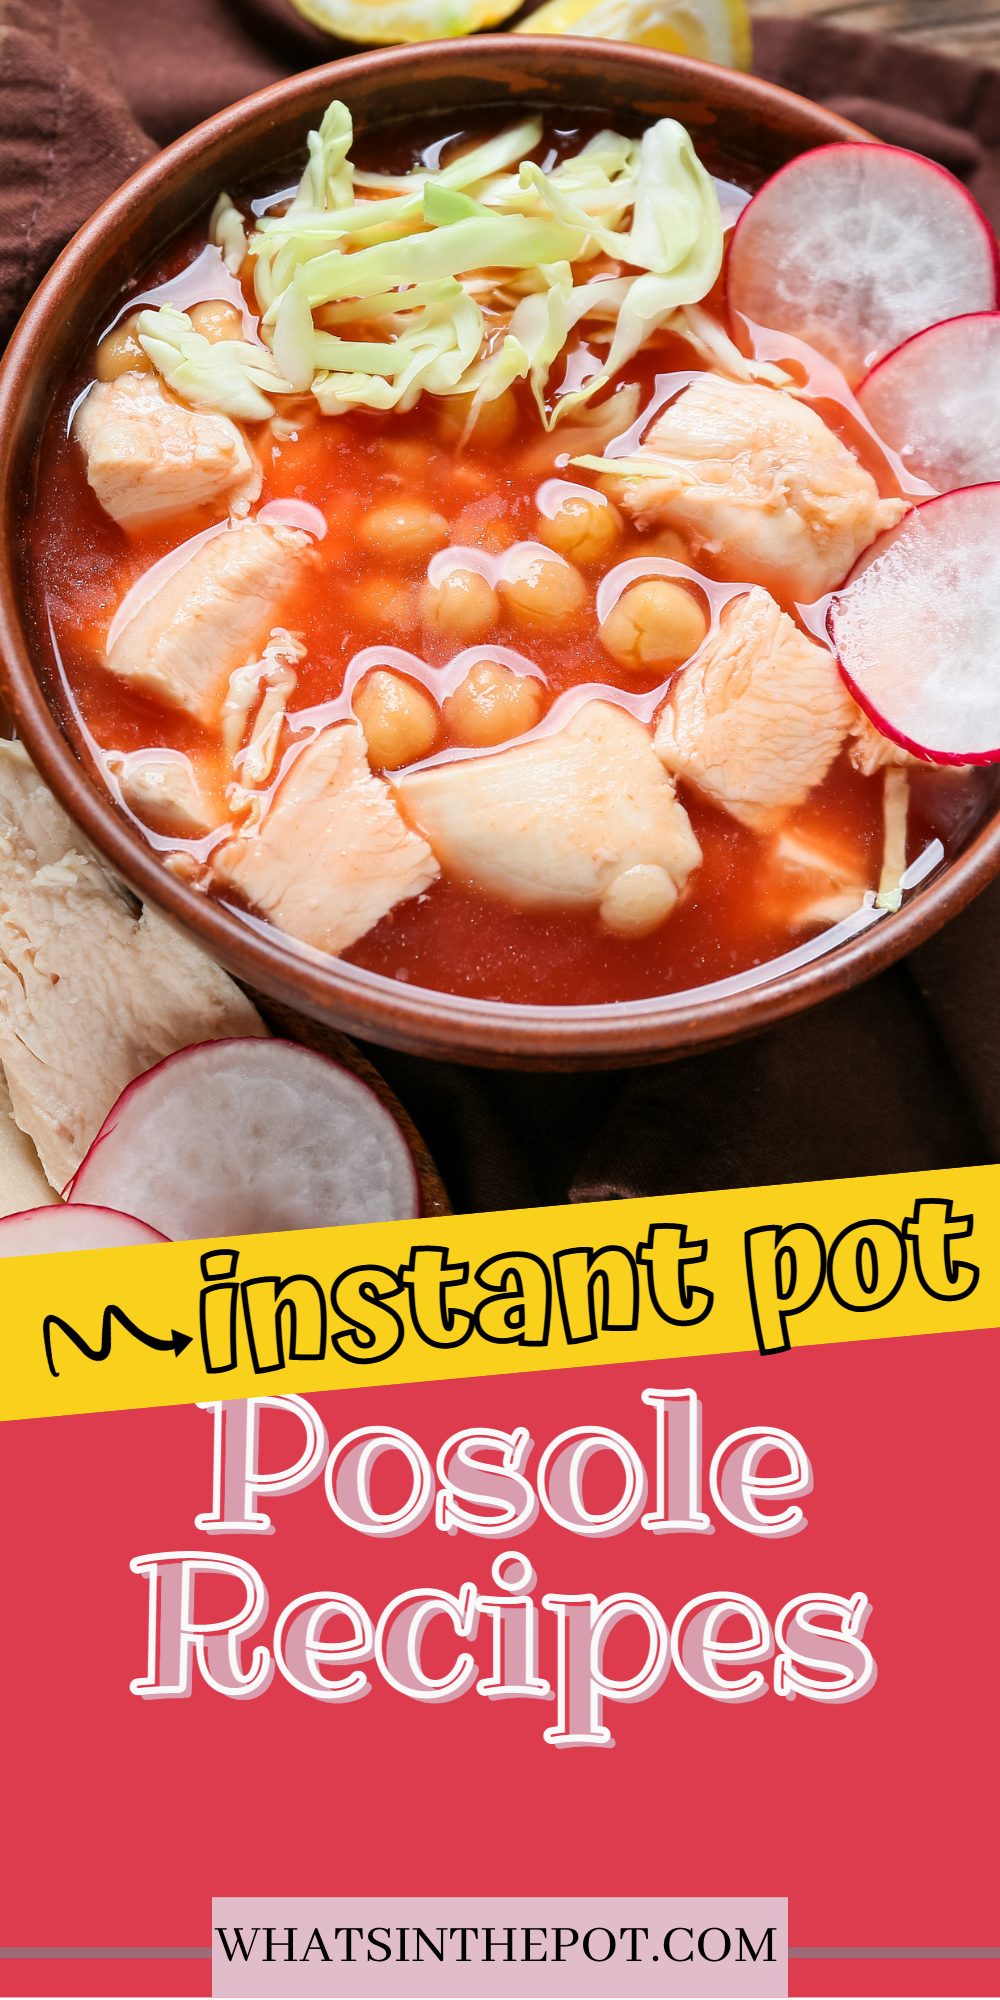 Mexican posole is a traditional soup in Mexico - it can be made with pork or chicken. This recipe uses the pressure cooker, though it could easily be adapted for the slow cooker. Read on to learn how to cook posole, as well as how to stay healthy this winter!